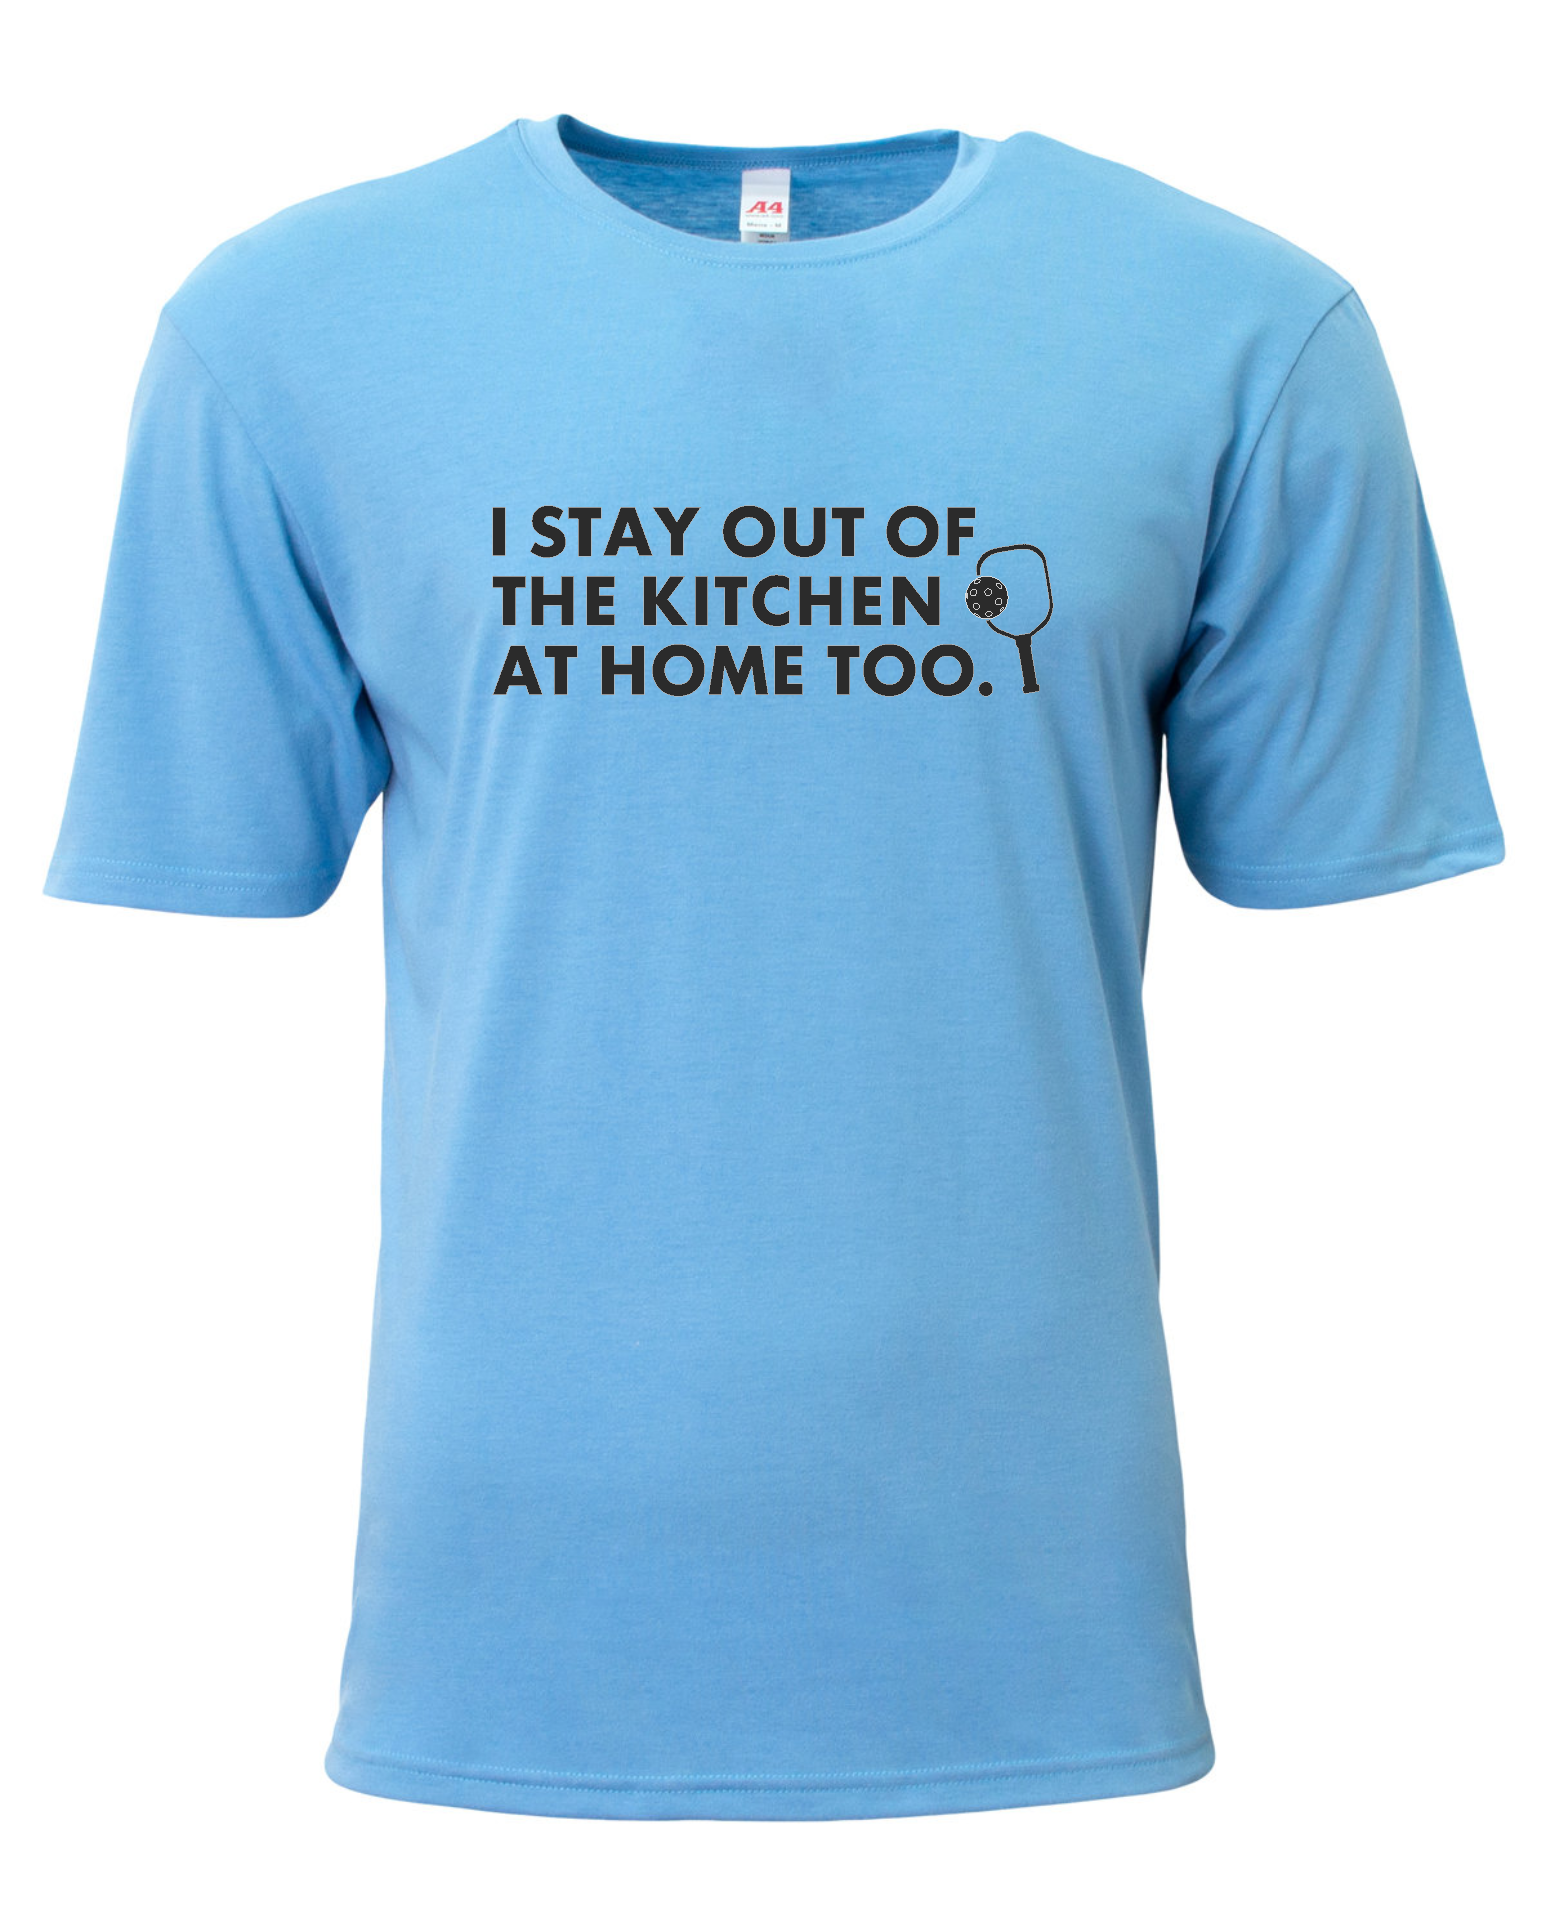 STAY OUT OF THE KITCHEN CREW NECK, V-NECK, OR LONG SLEEVE T-SHIRTS